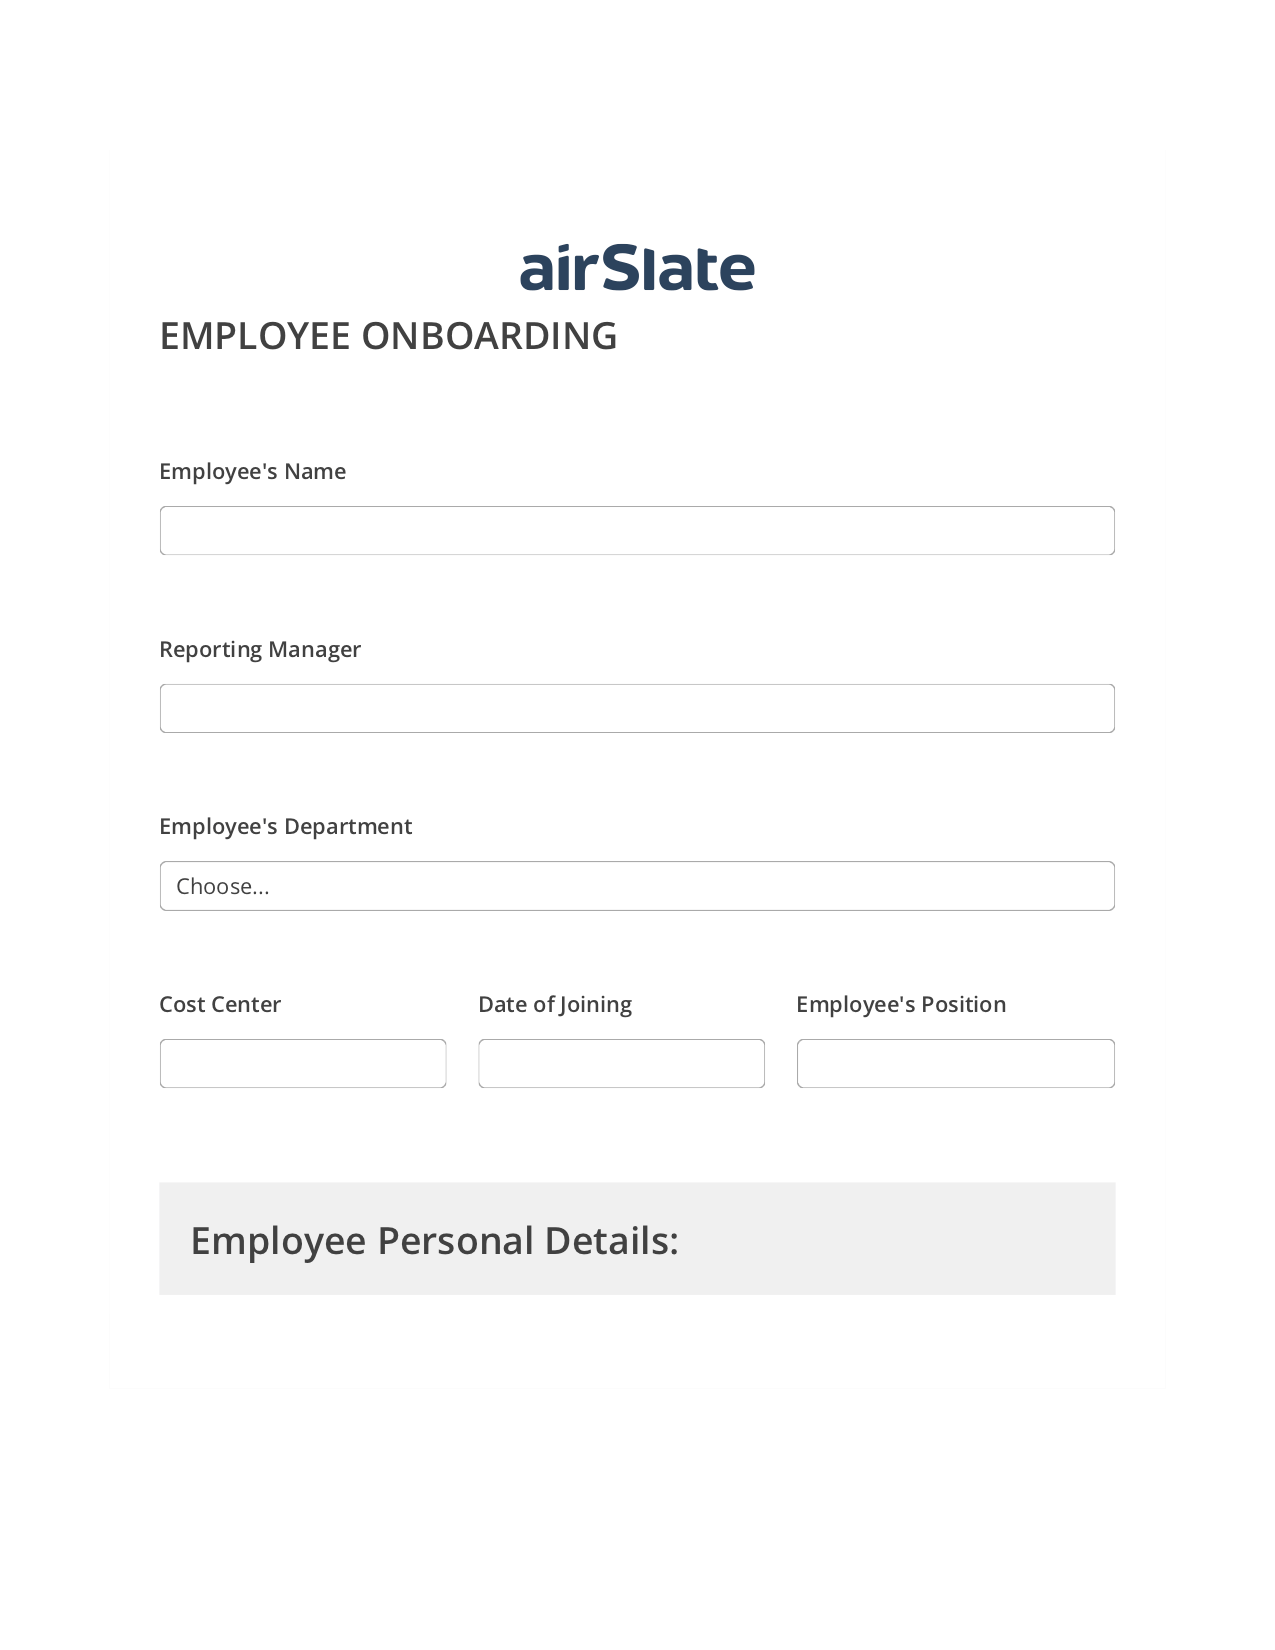 Employee Onboarding Workflow Pre-fill from Excel Spreadsheet Dropdown Options Bot, Add Tags to Slate Bot, Export to NetSuite Bot